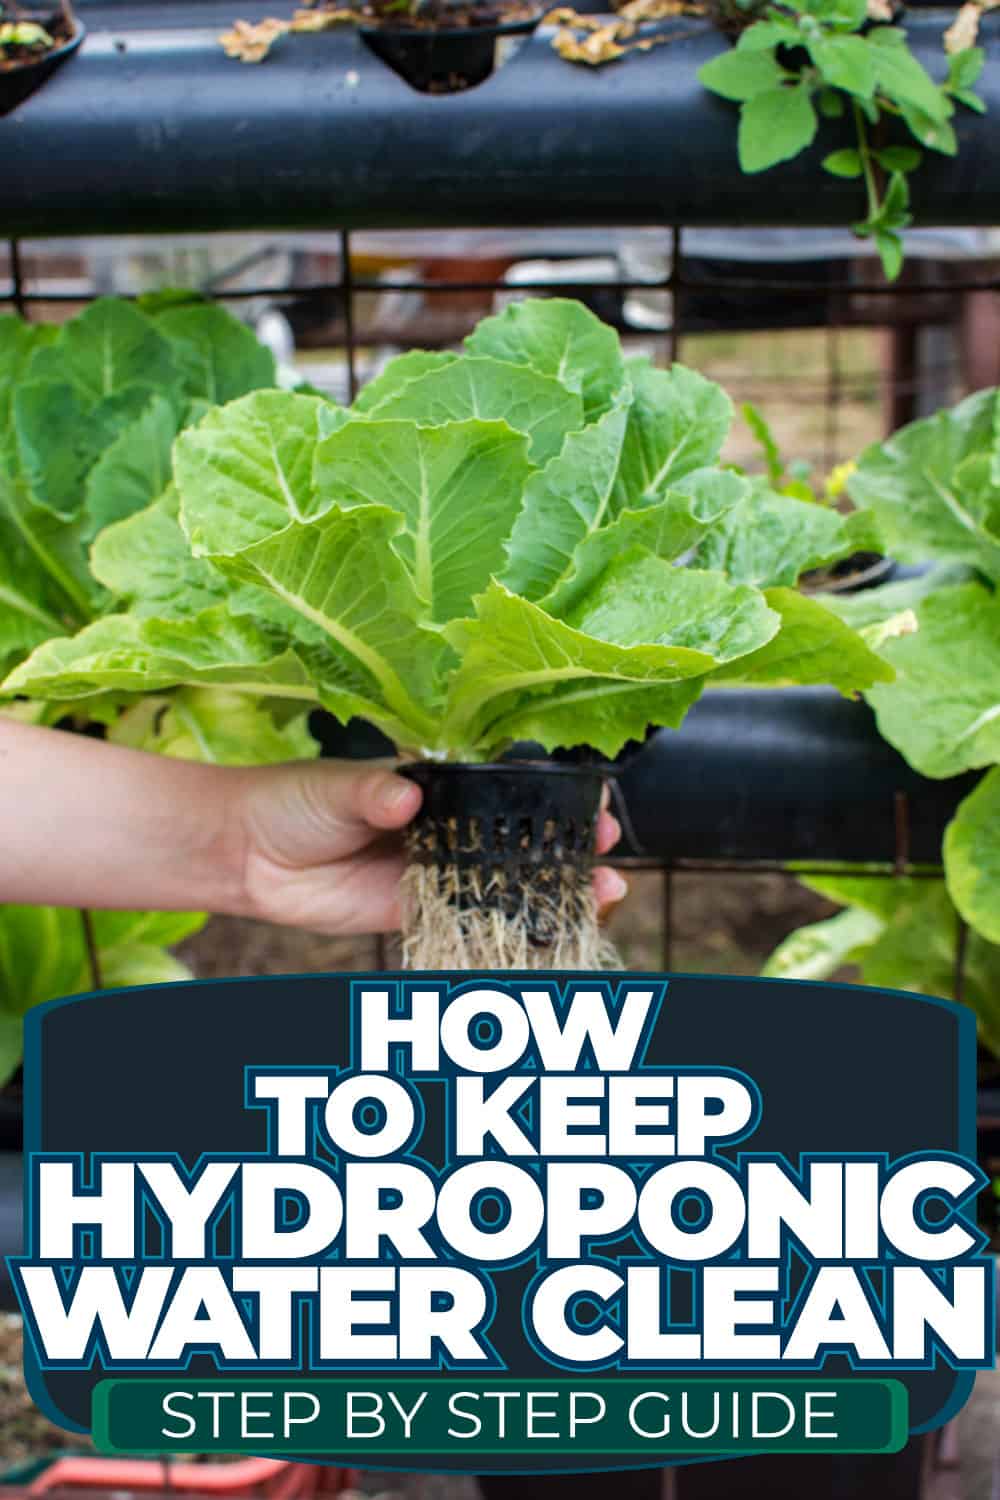 How To Keep Hydroponic Water Clean [Step By Step Guide]